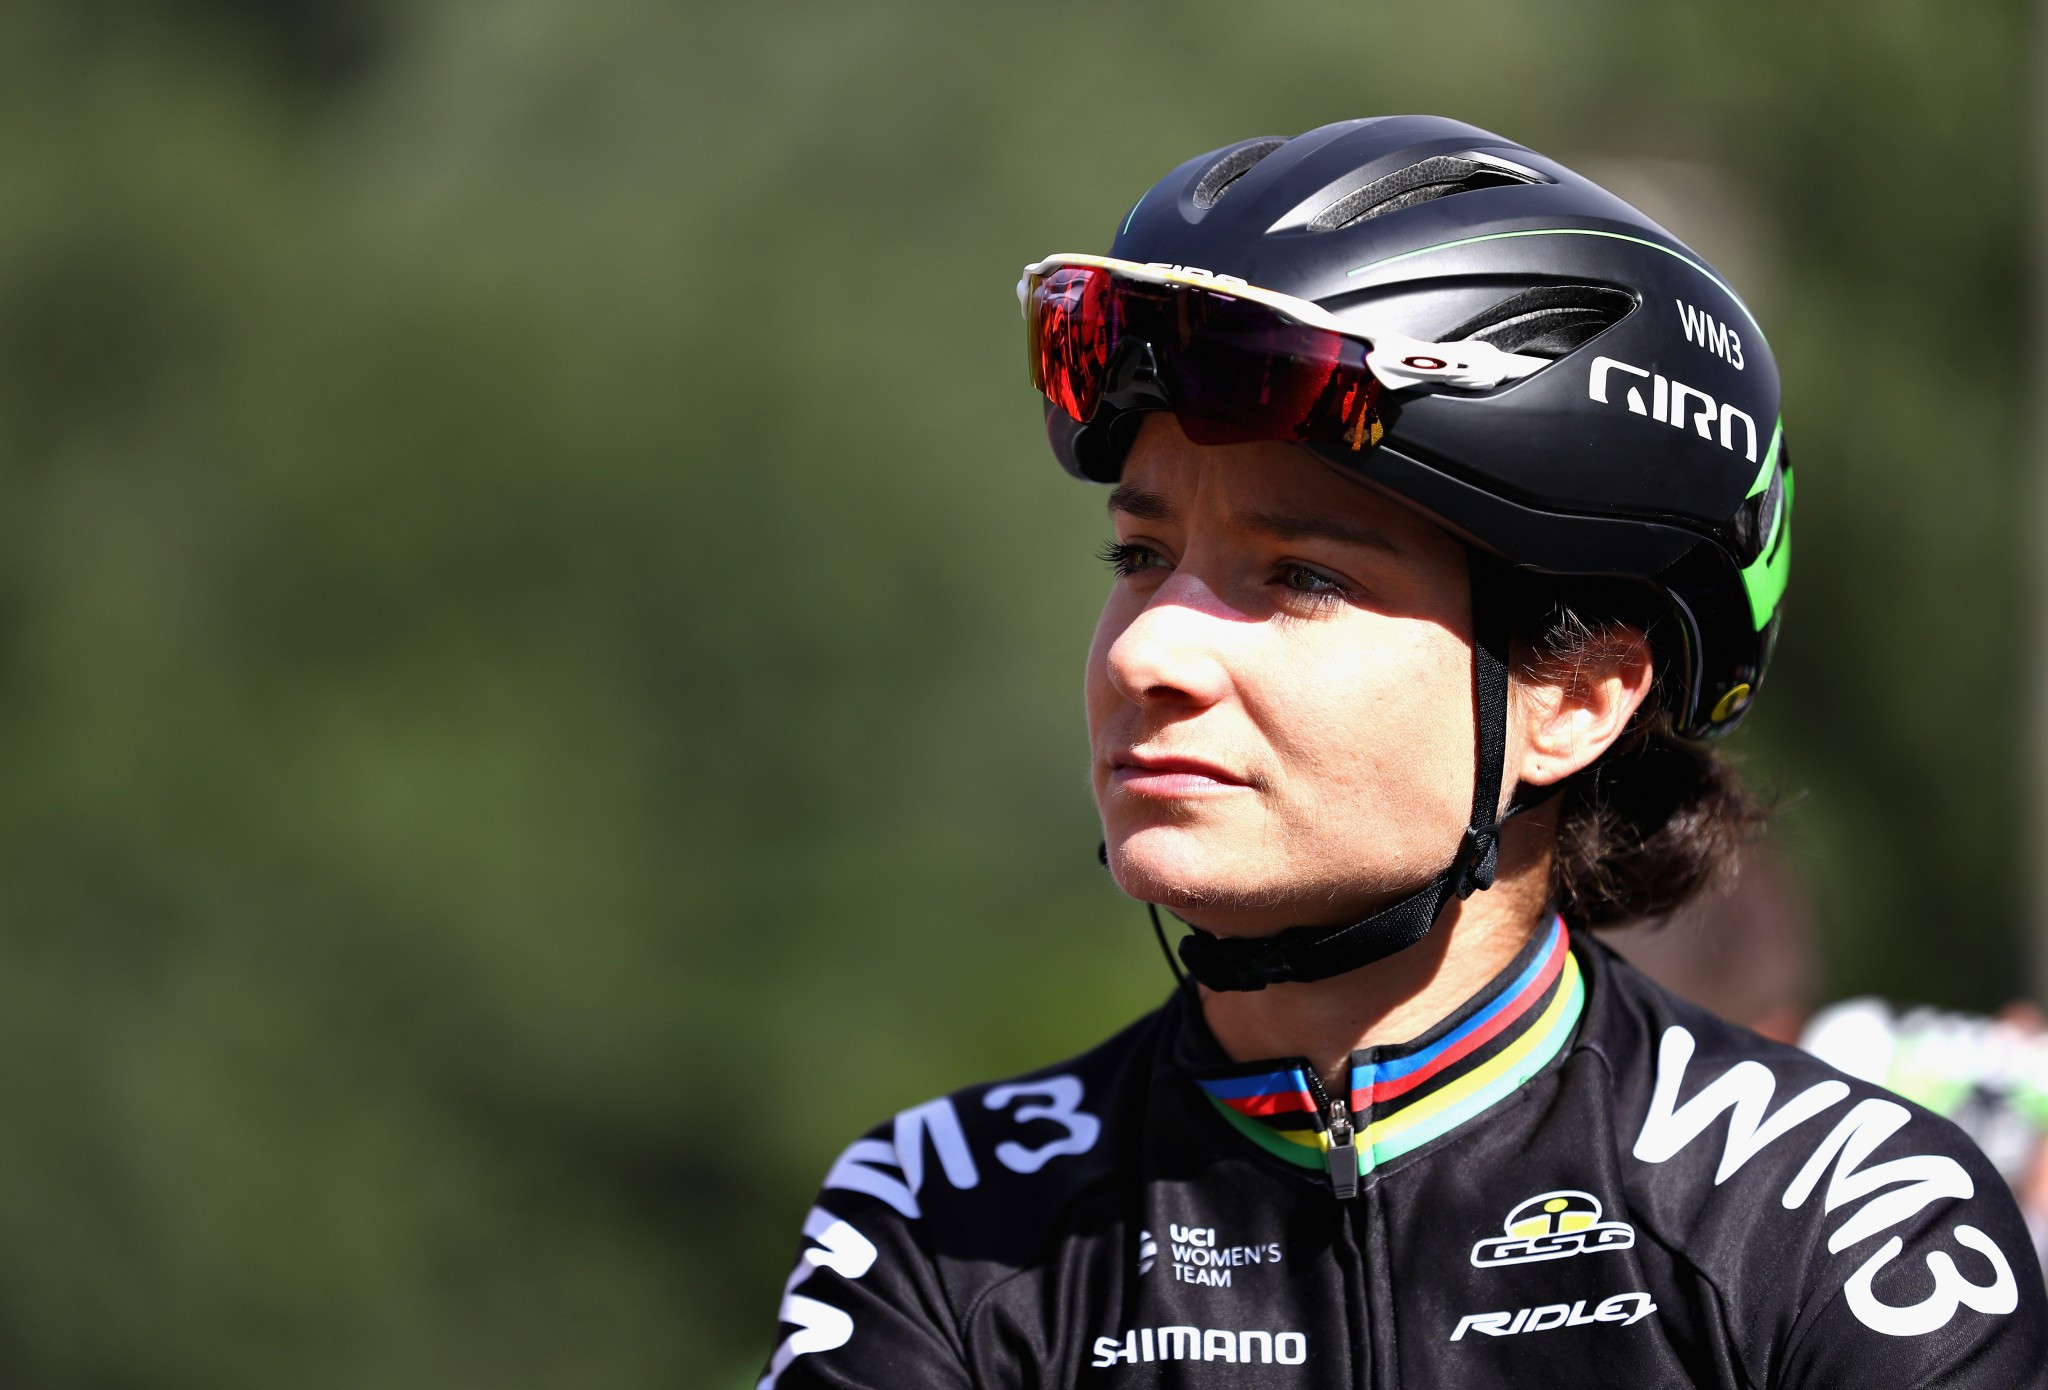 Marianne Vos had to settle for second place behind her fellow Dutch rider ©Getty Images